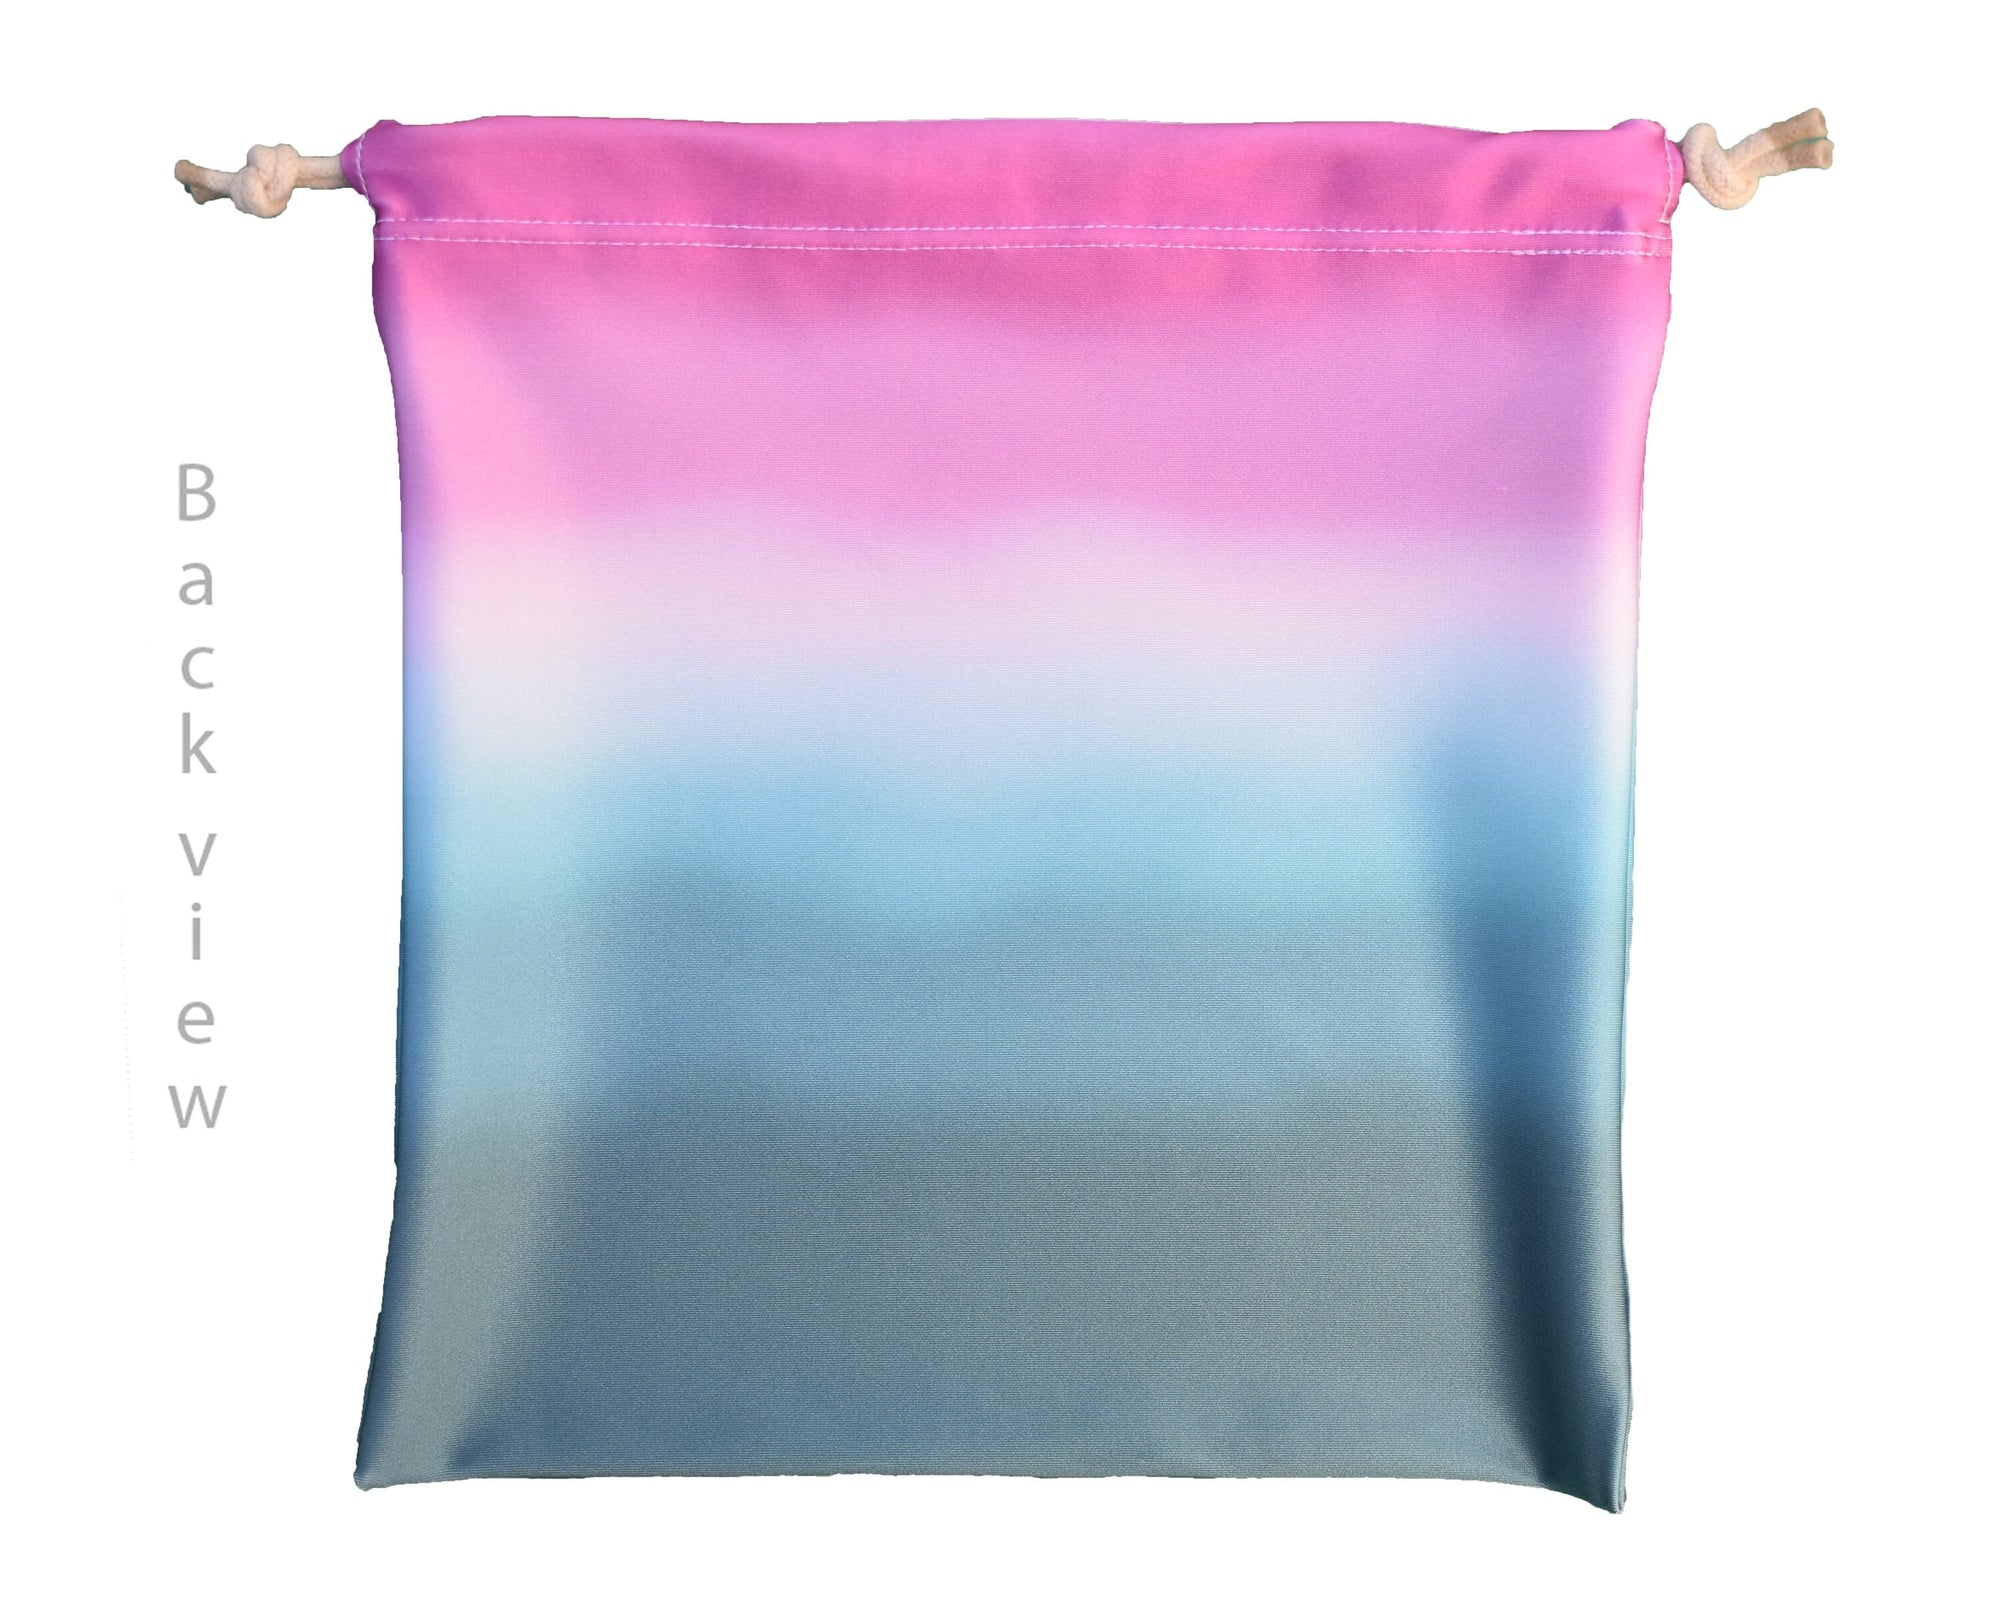 Personalized Gymnastics Grip Bag in Teal Pink Ombre with Split Handstand